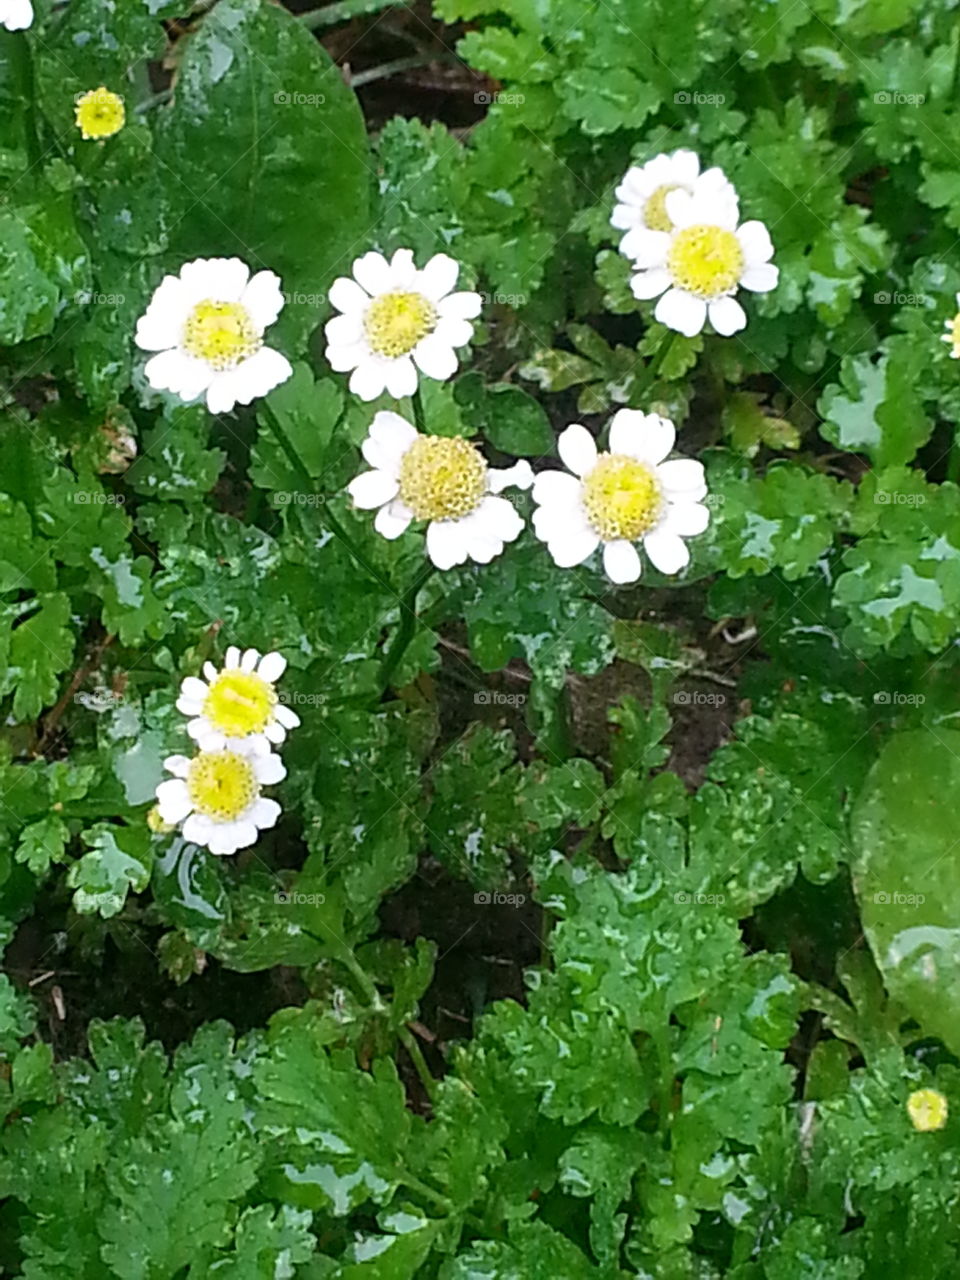 Small Daisy-looking Flowers